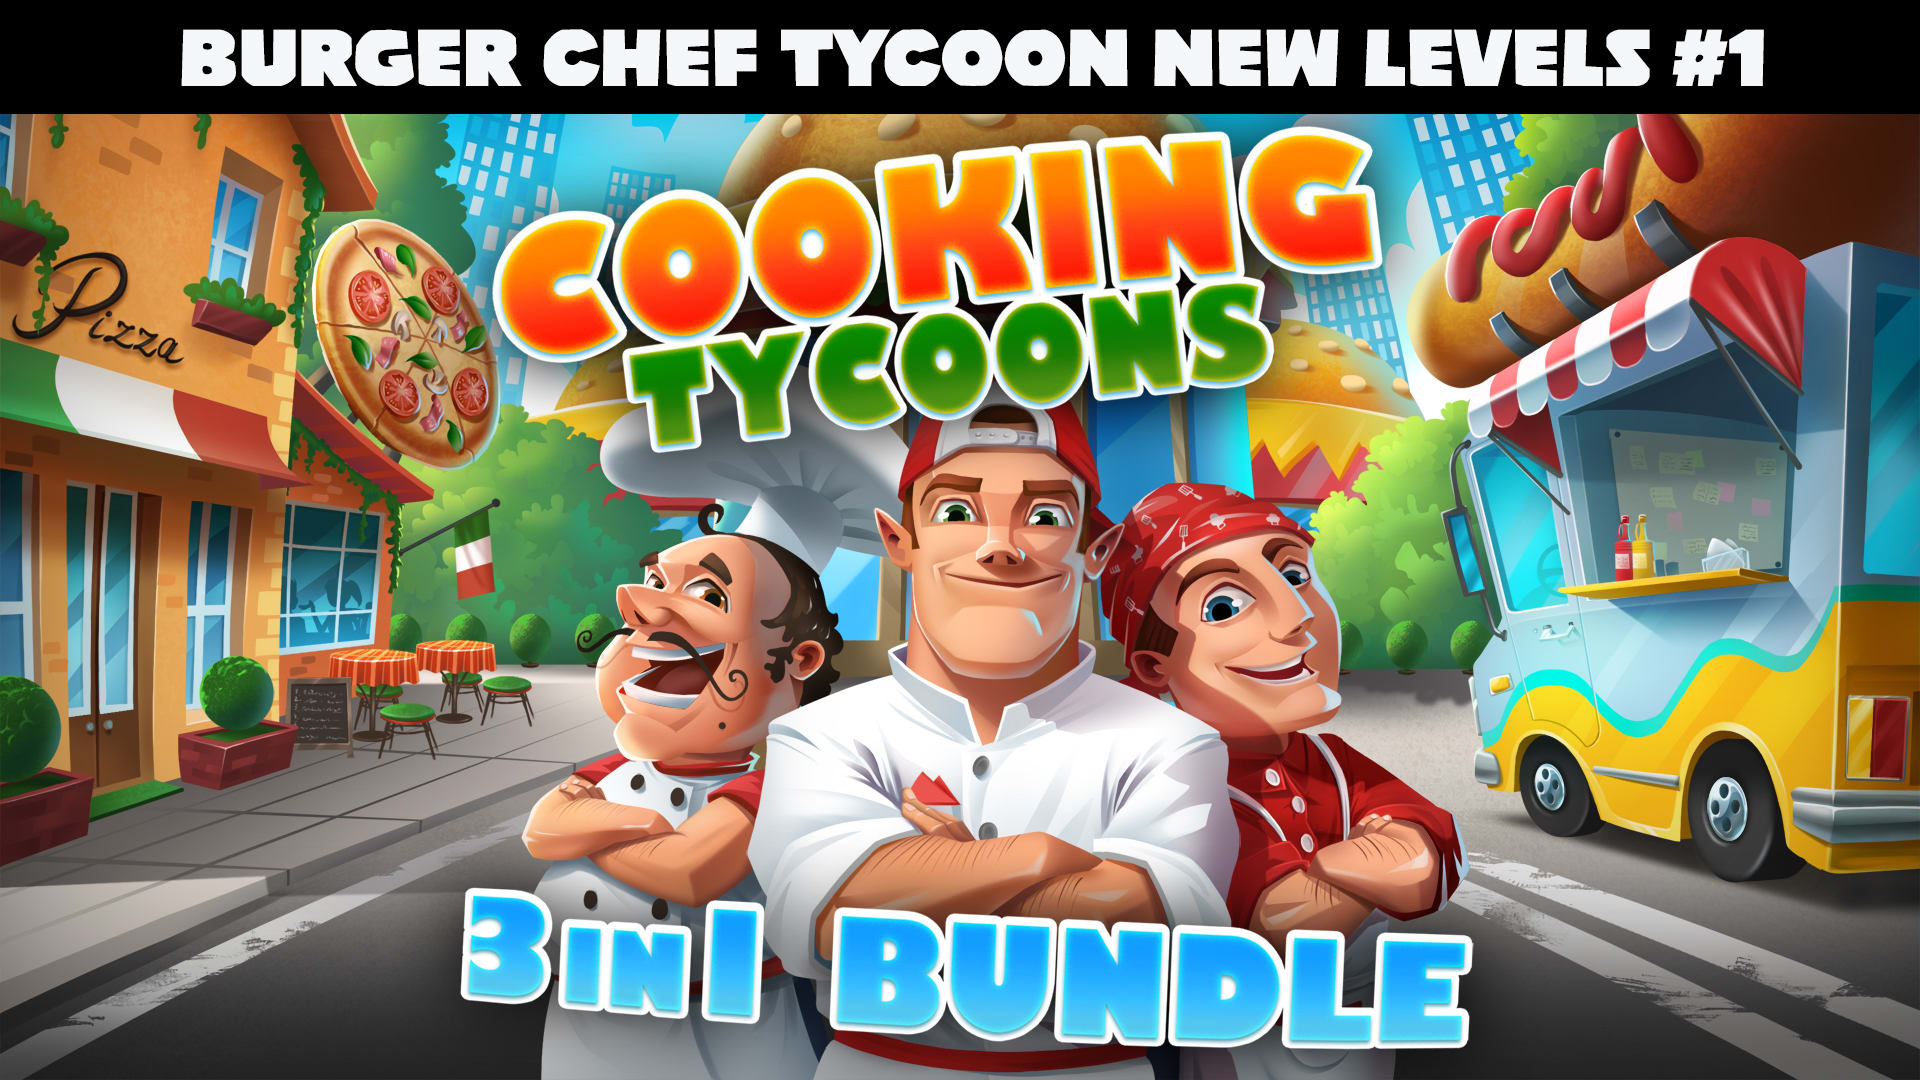 Cooking Tycoons: 3 in 1 Bundle - Burger Chef Tycoon New Levels #1 1